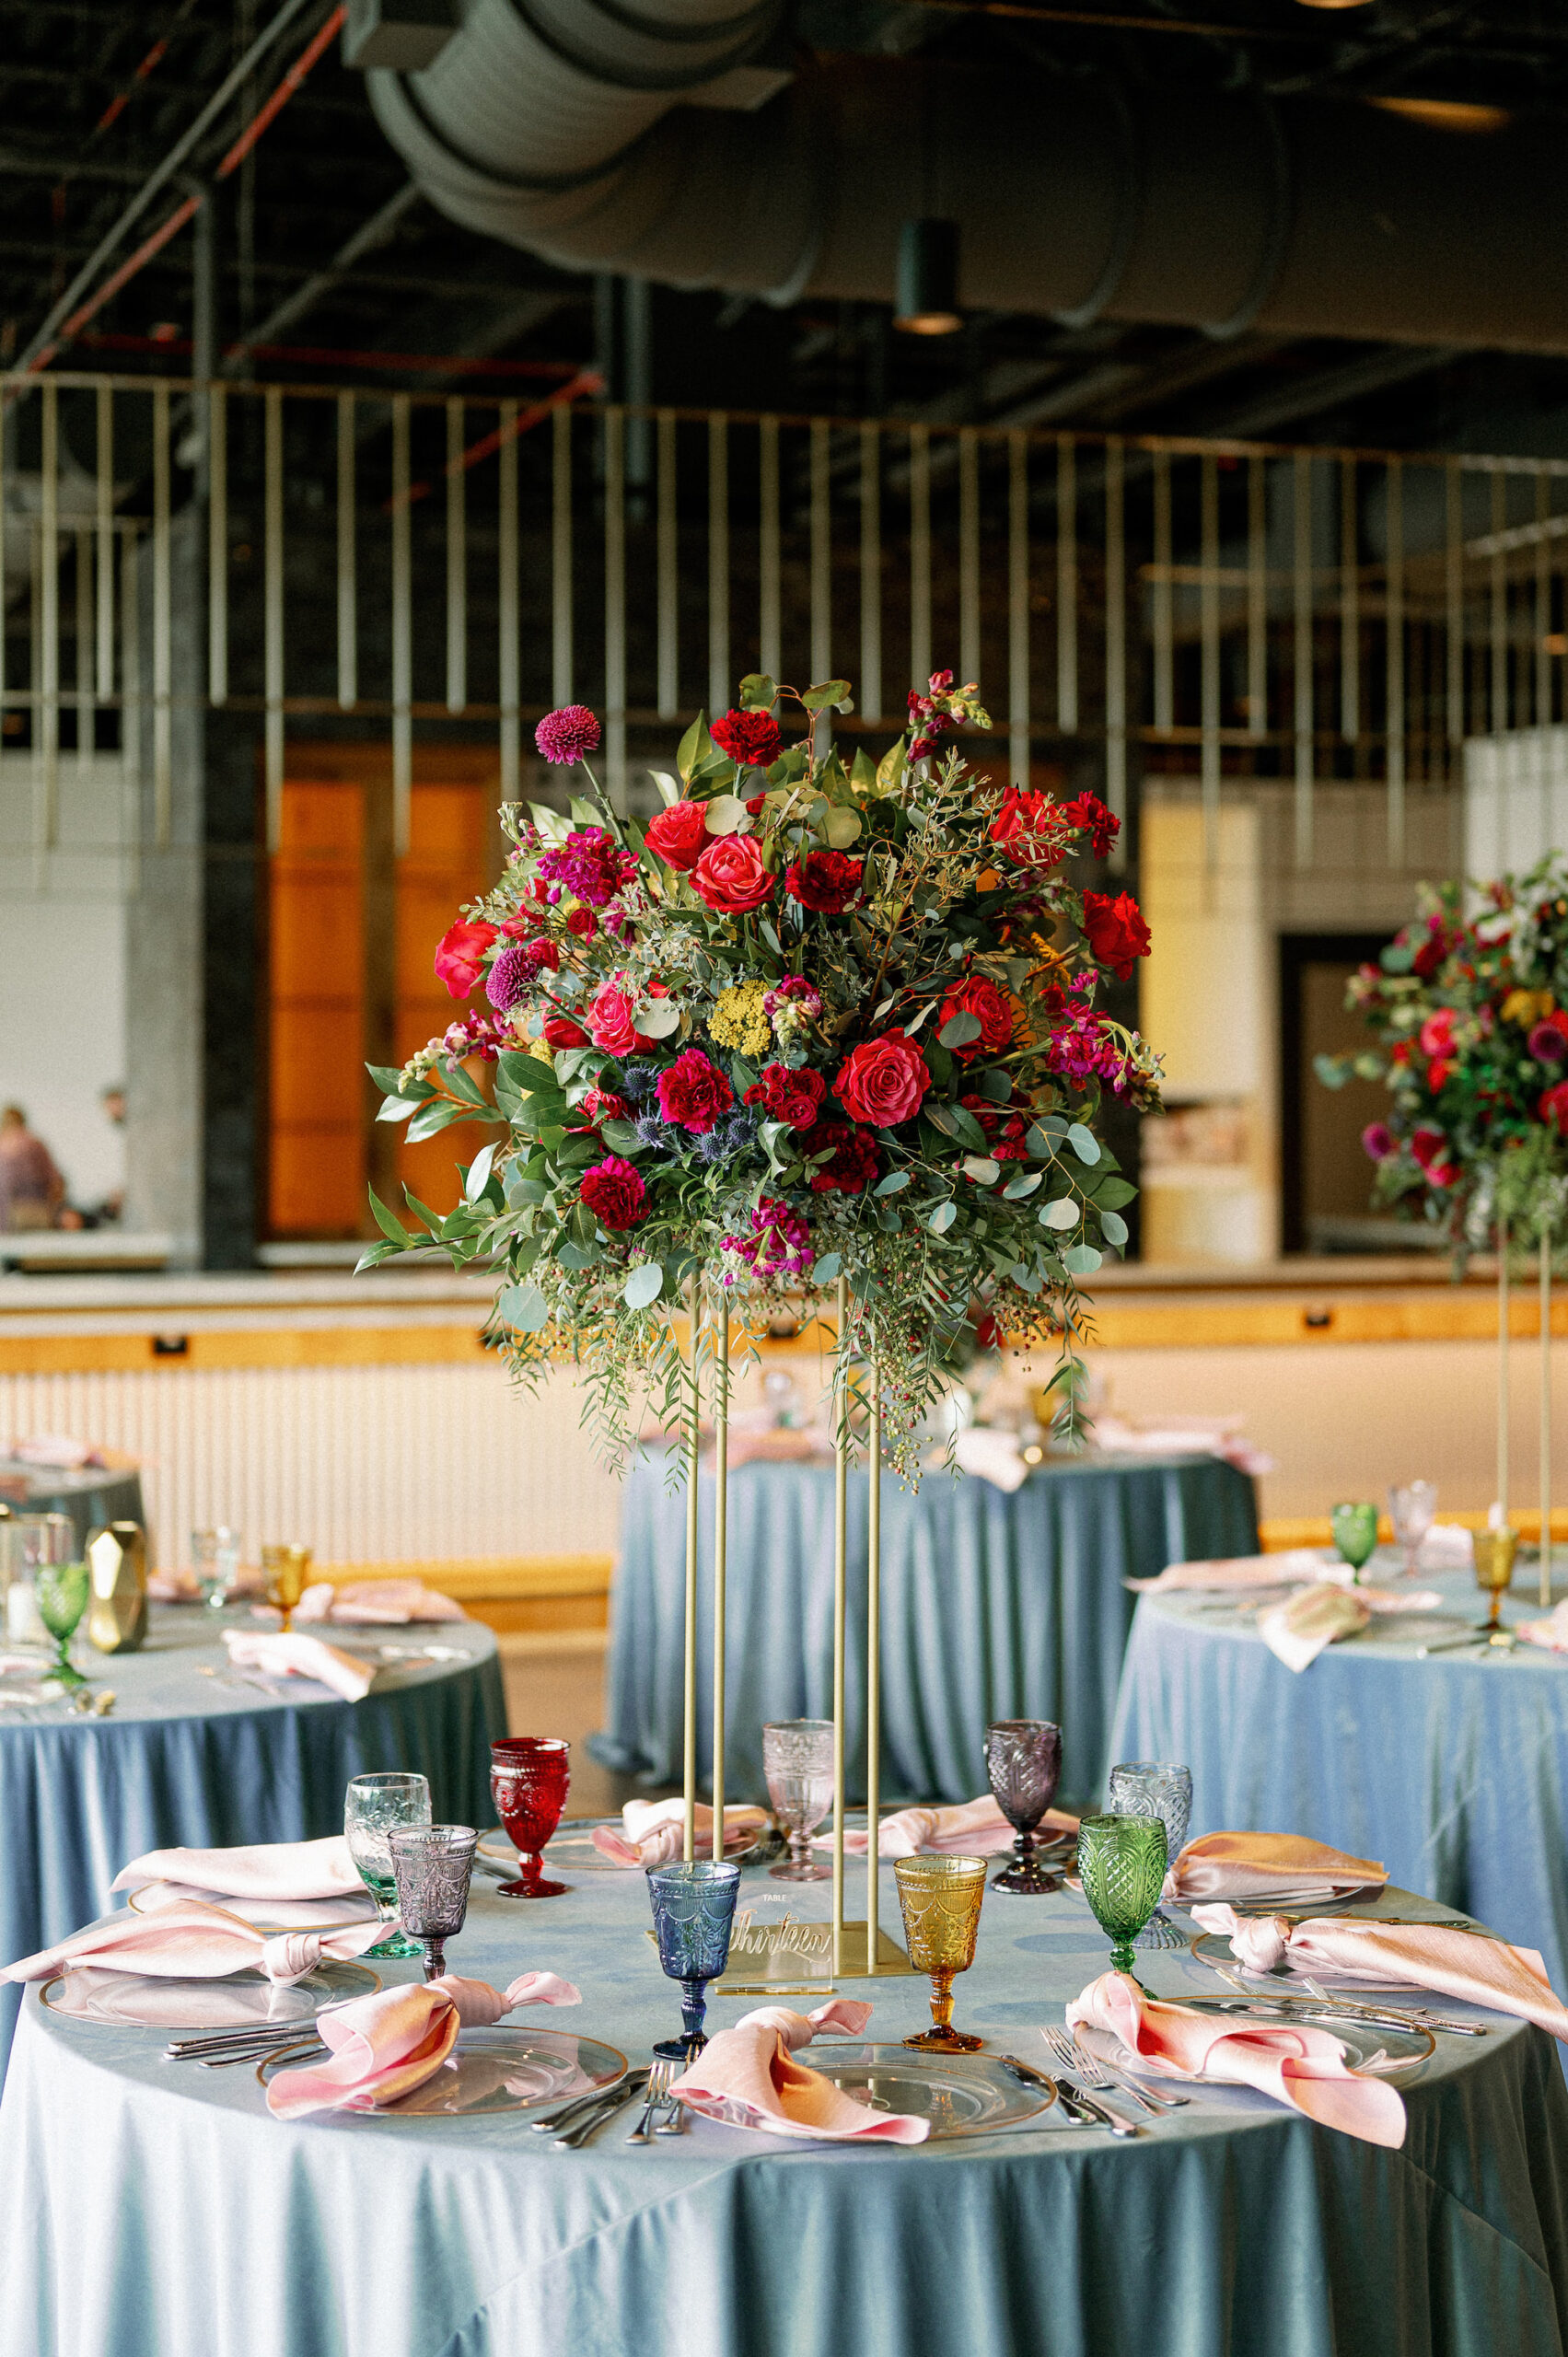 Vibrant Wedding Reception Decor, Round Tables with Dusty Blue Table Linens, Colorful Water Goblets, Tall Gold Stand with Lush Pink, Red Roses, Yellow Fuschia Flowers and Eucalyptus Greenery Leaves Centerpiece | Tampa Bay Wedding Photographer Dewitt for Love Photography | Wedding Rentals Gabro Event Services